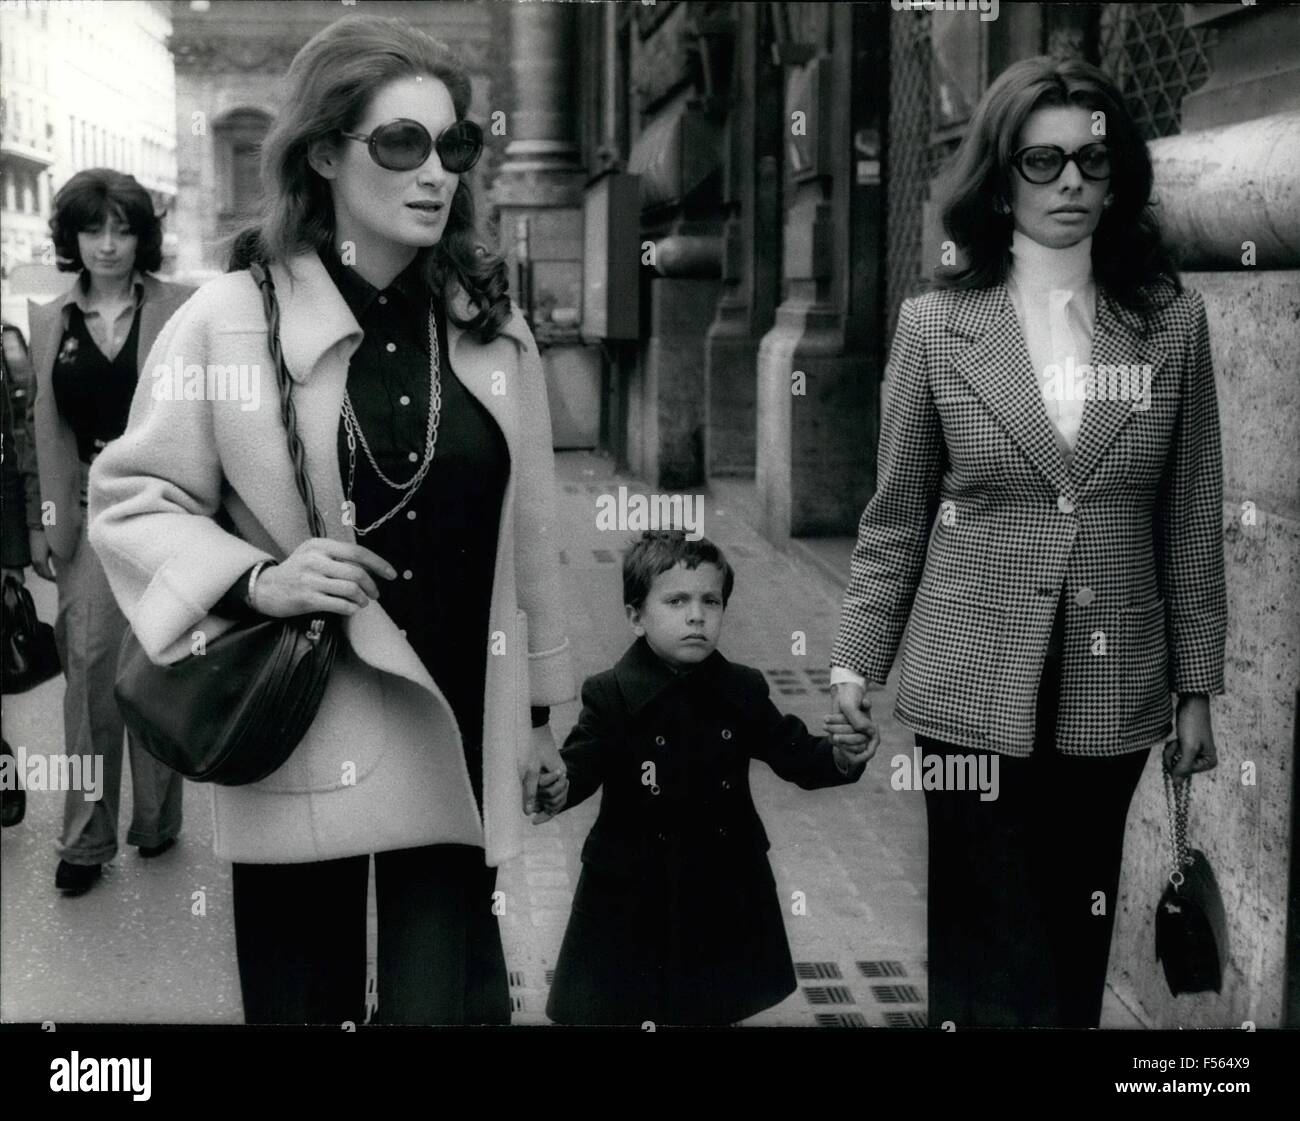 1968 - The first going out of Sophia Loren after the birth of her second son. Here she is accompanied by her friend the actress Annabella Incontrera and her first son Carlo Ponti jr, said C.p. (cipi) © Keystone Pictures USA/ZUMAPRESS.com/Alamy Live News Stock Photo